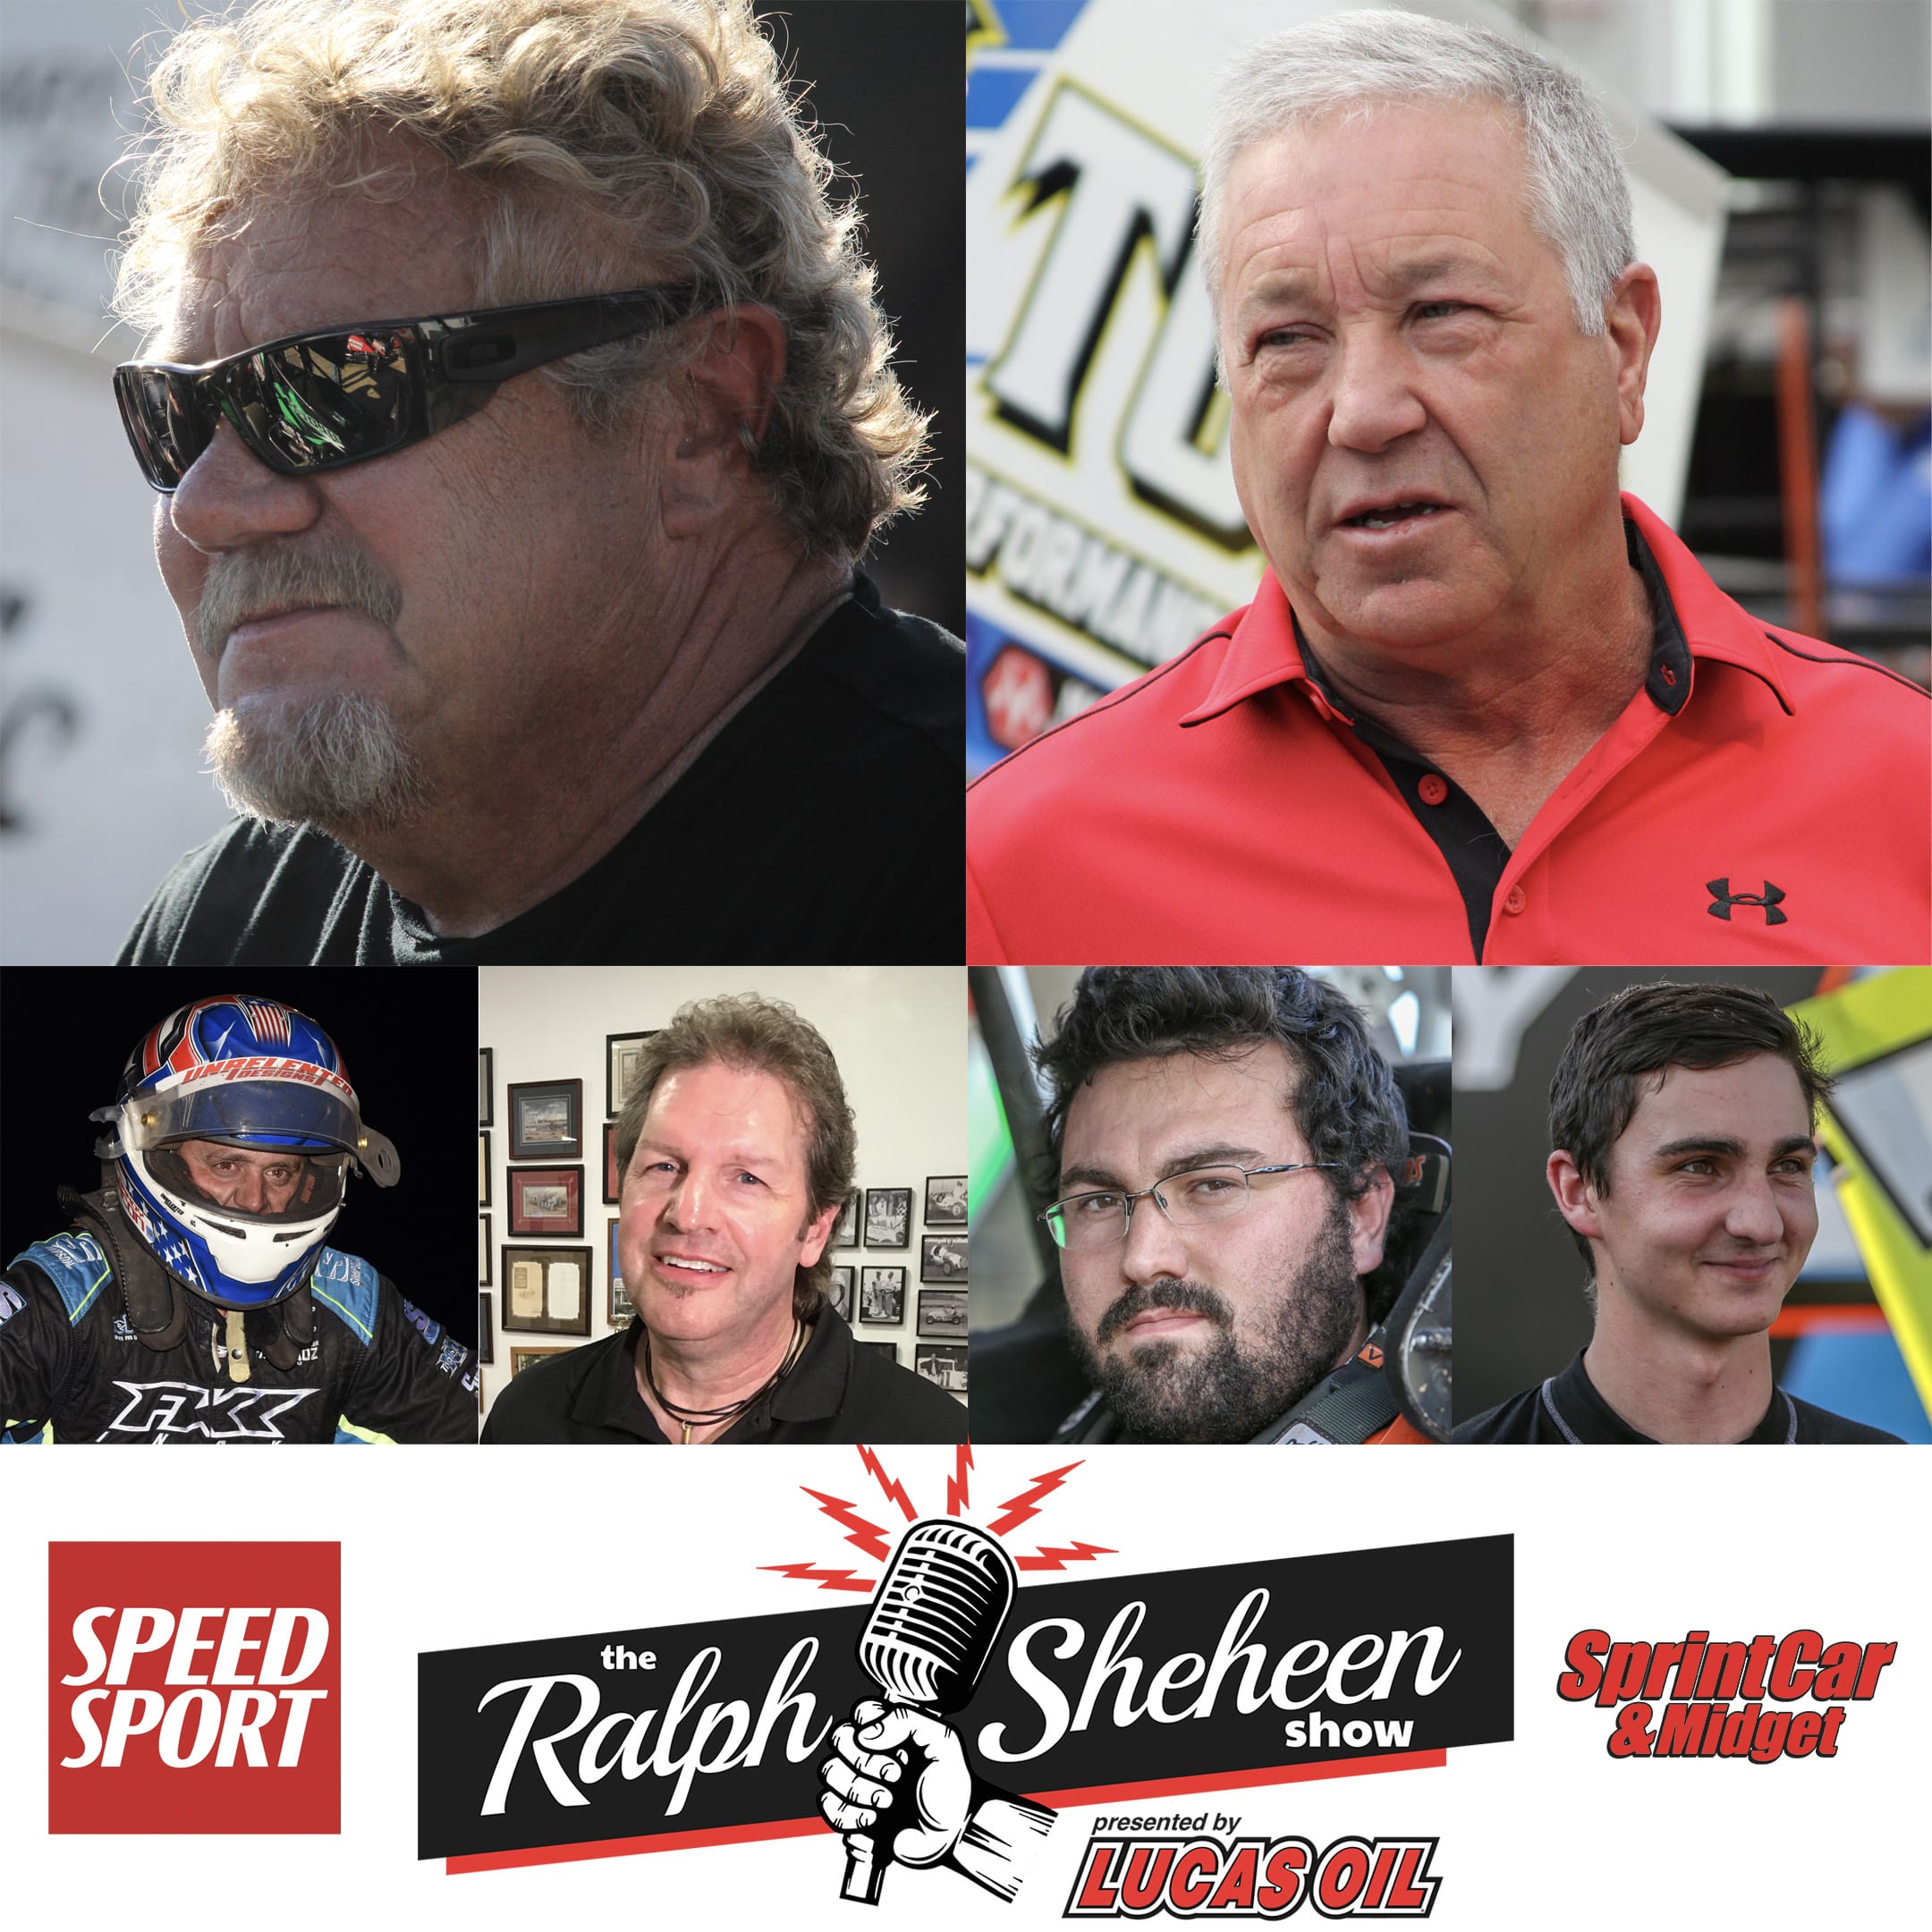 Steve Kinser and Sammy Swindell will headline a live taping of The Ralph Sheheen Show presented by Lucas Oil Saturday at Knoxville Raceway.